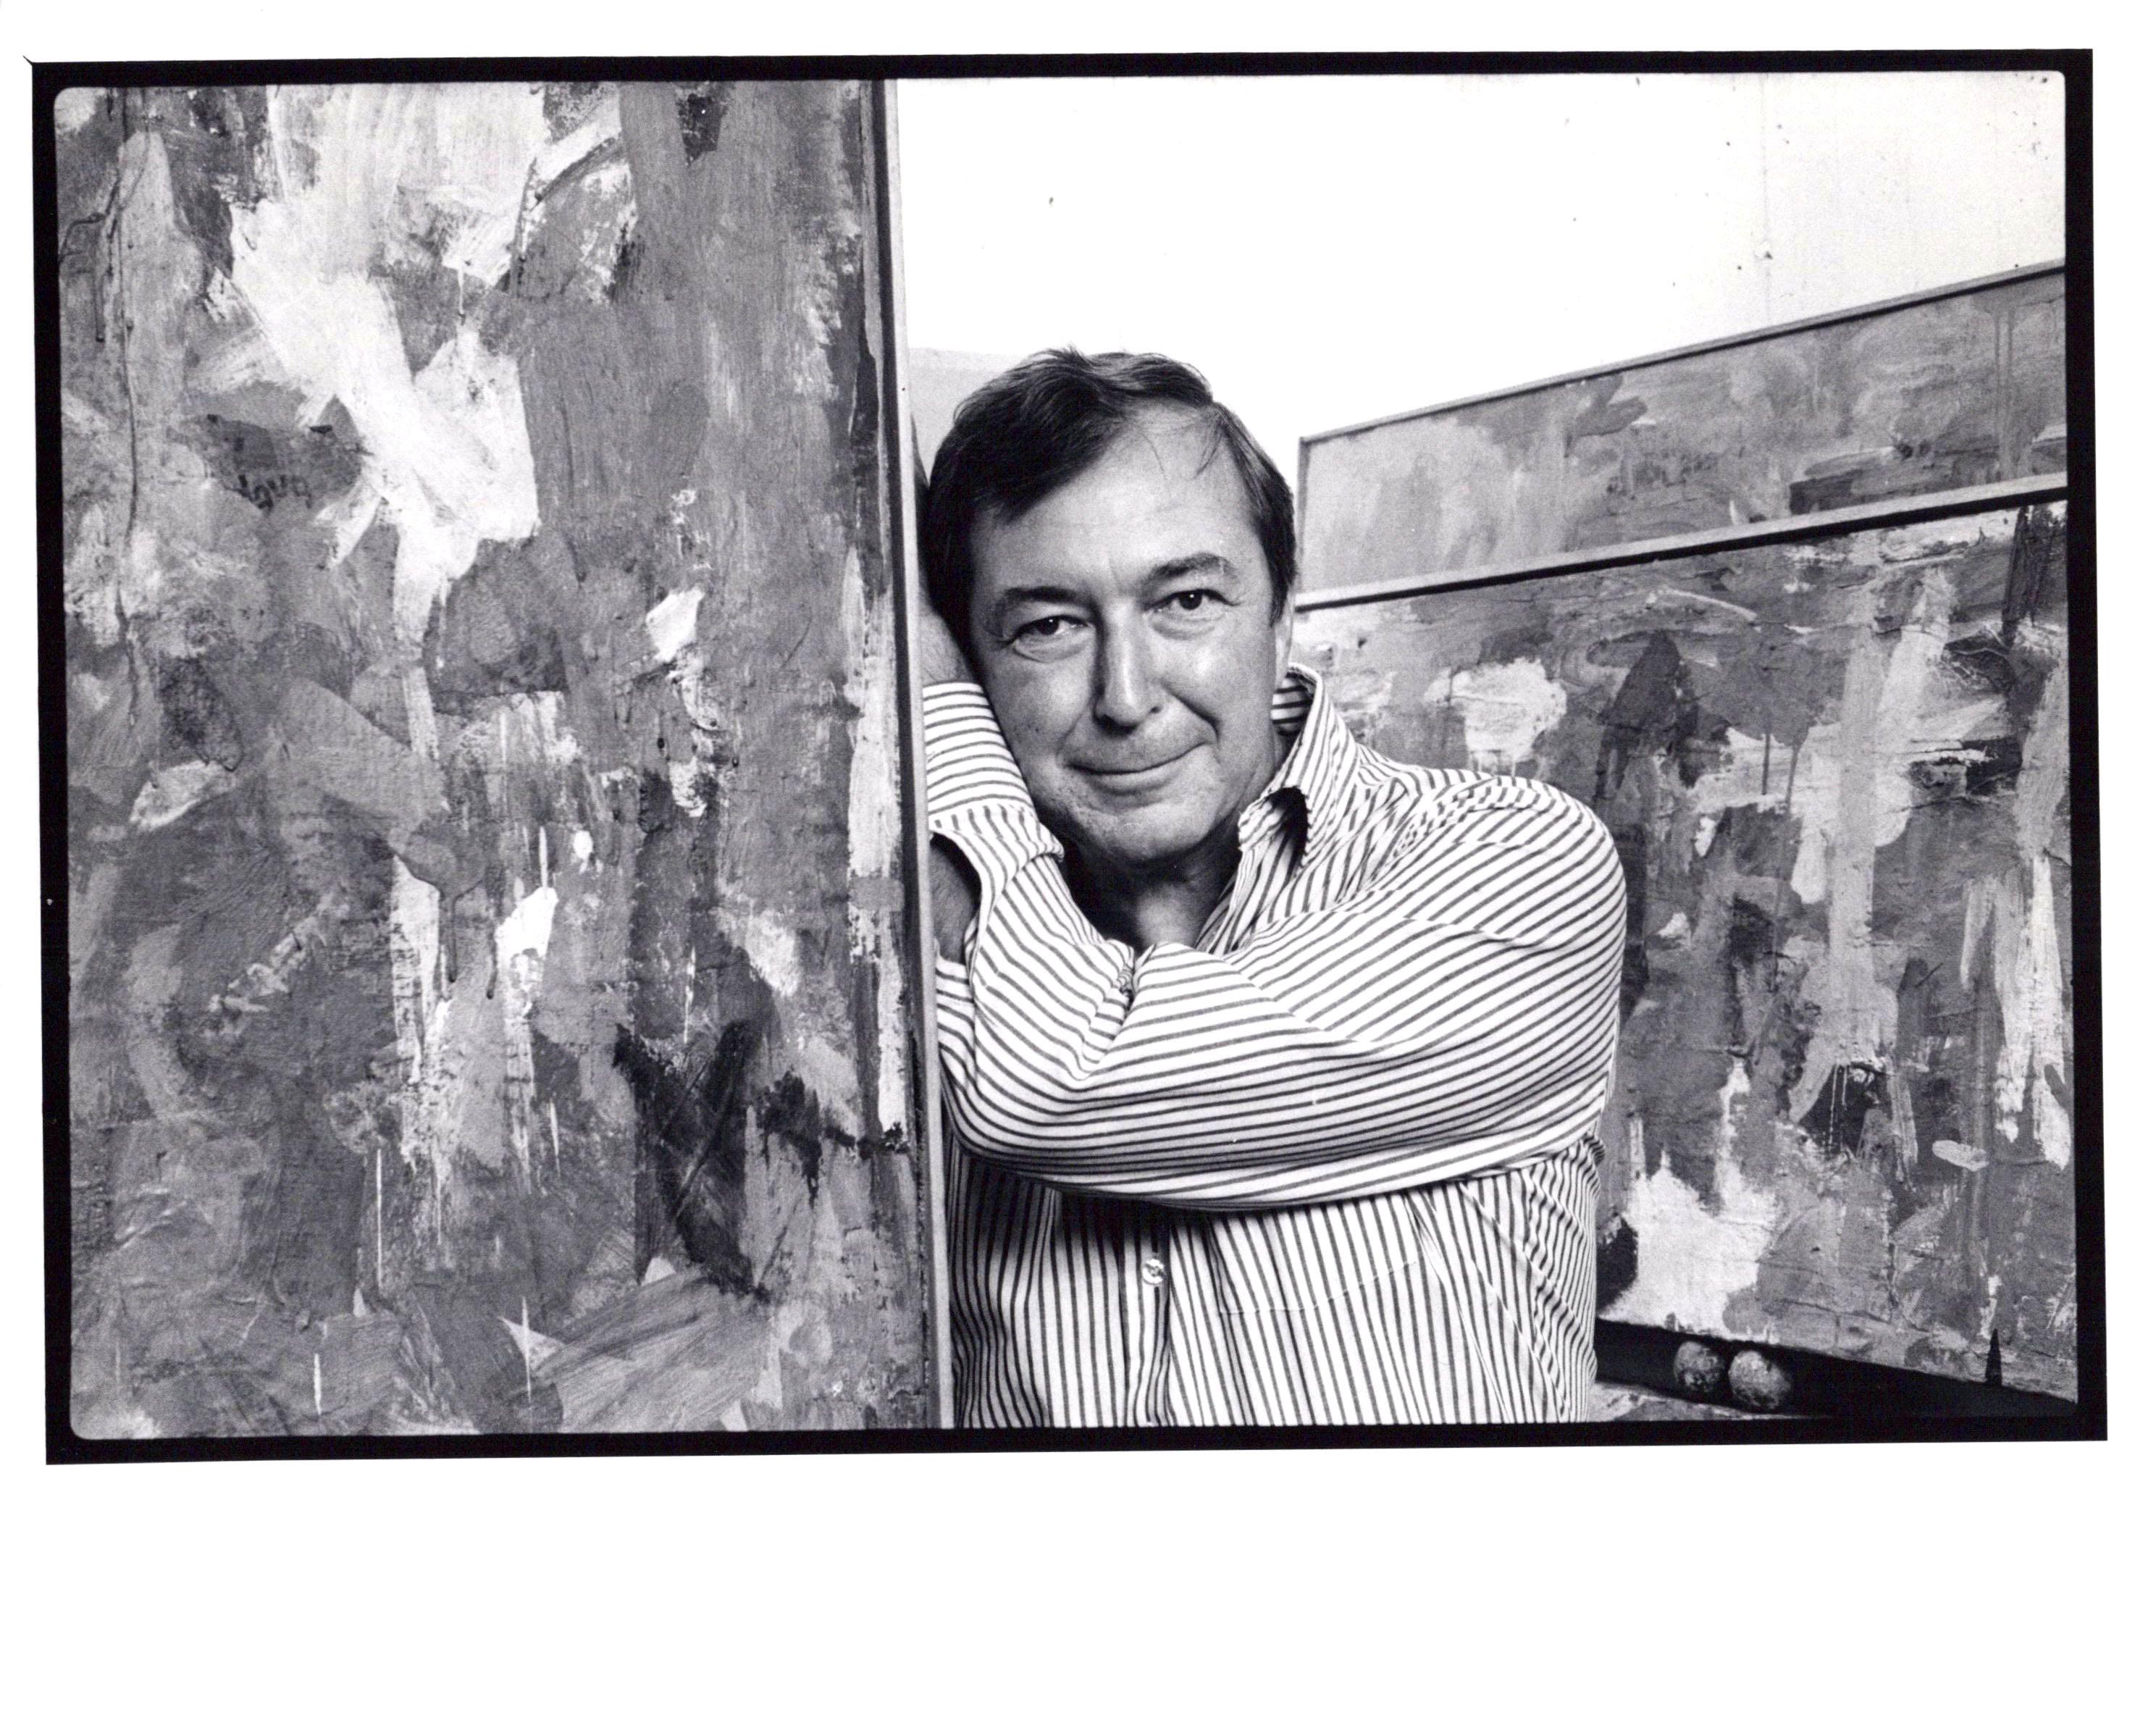 Jack Mitchell Portrait Photograph - Artist Jasper Johns photographed with his work at the Whitney in New York City